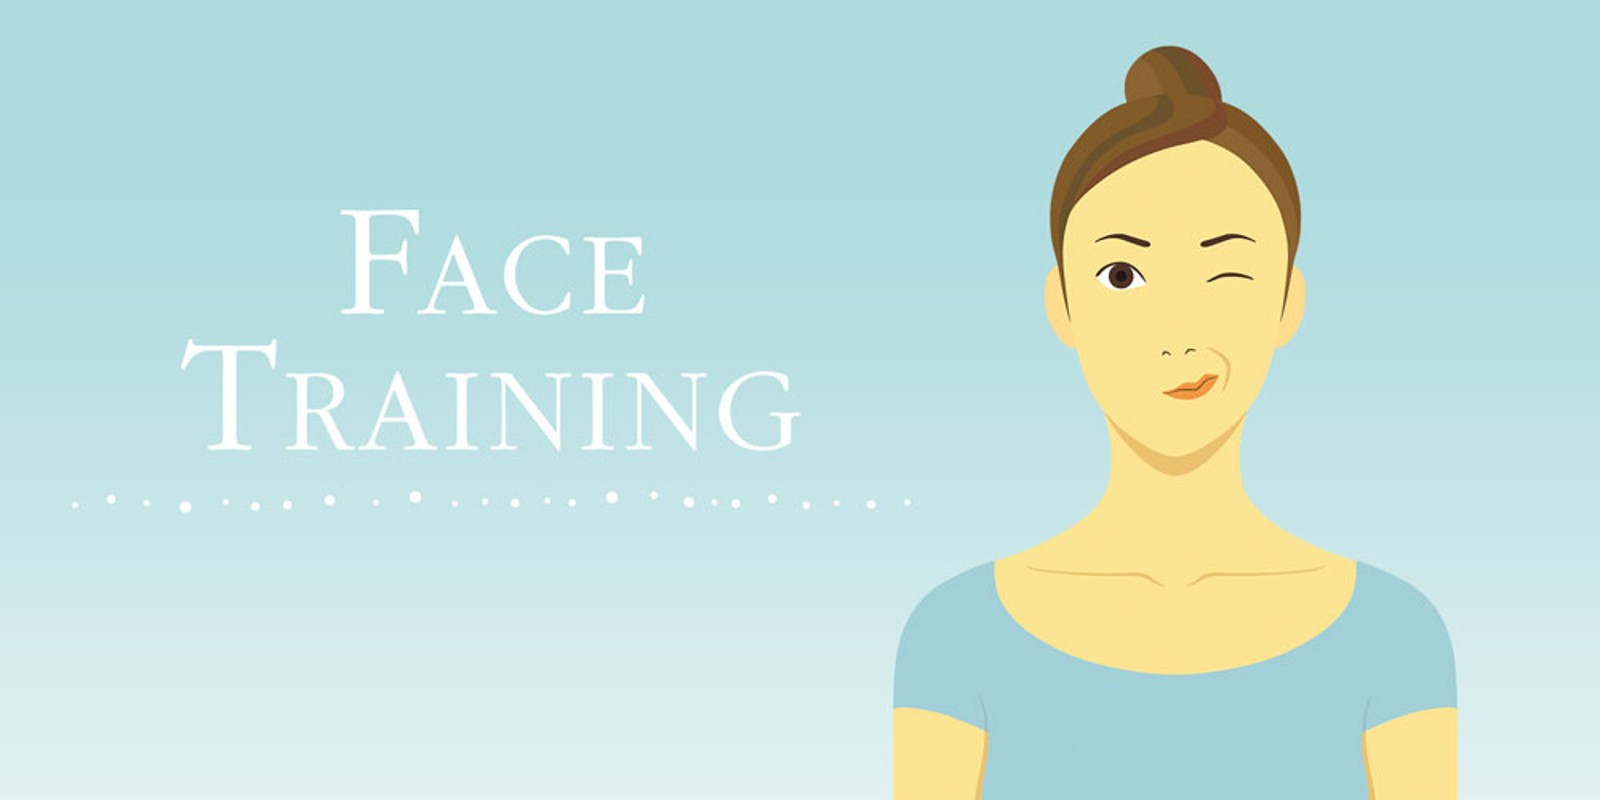 Face Training: Facial exercises to strengthen and relax from Fumiko Inudo